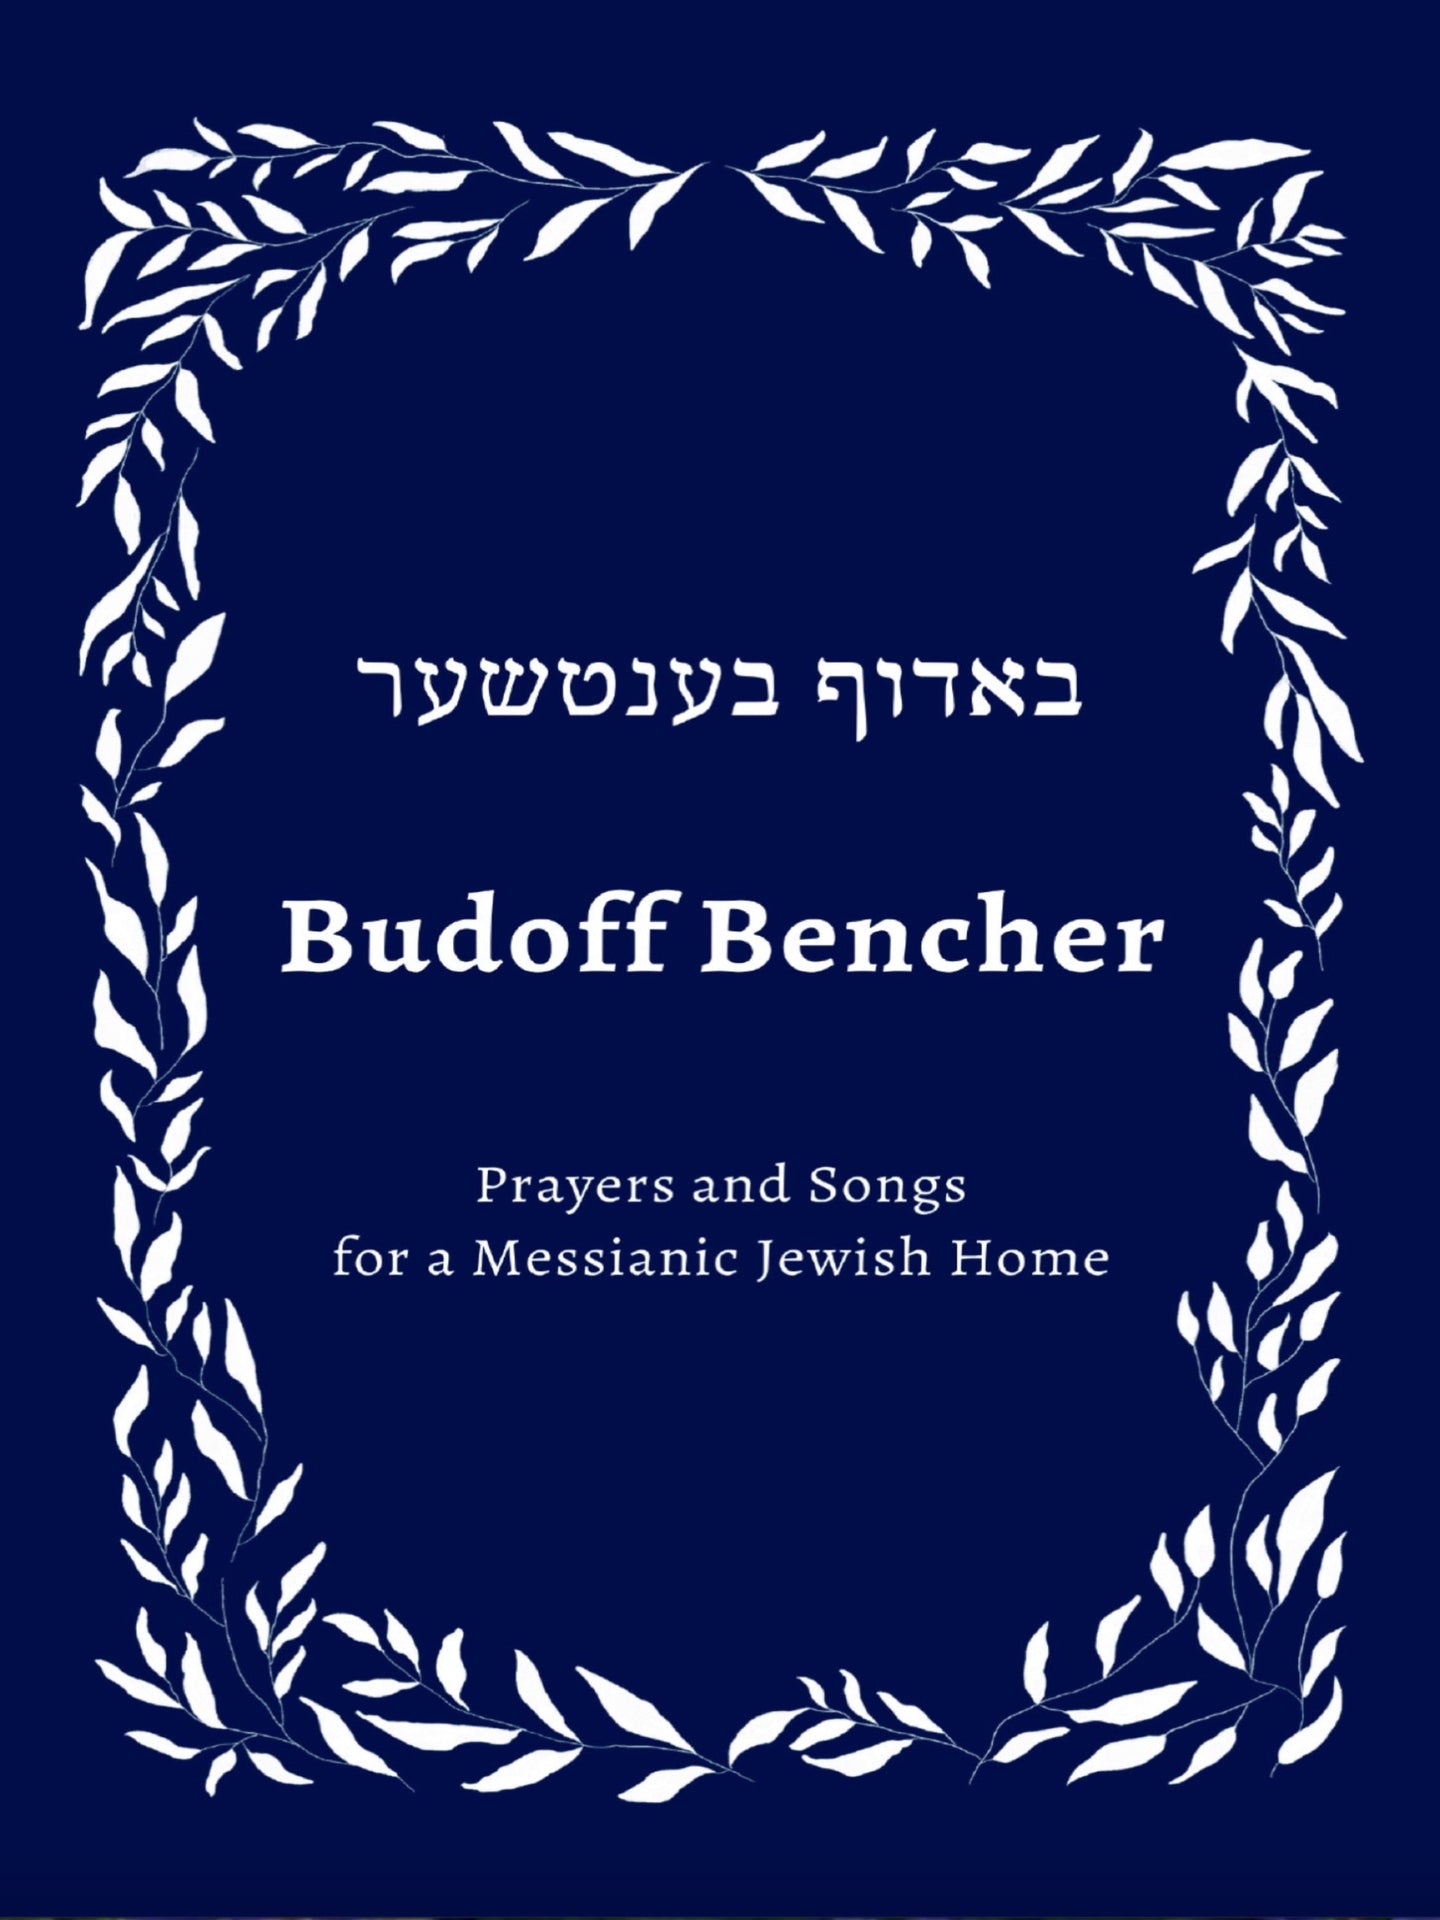 Budoff Bencher: A Book of Prayers and Songs for a Messianic Jewish Home —Edited by Rabbi Kirk Gliebe      50% off for 5 or more! (Use the code 